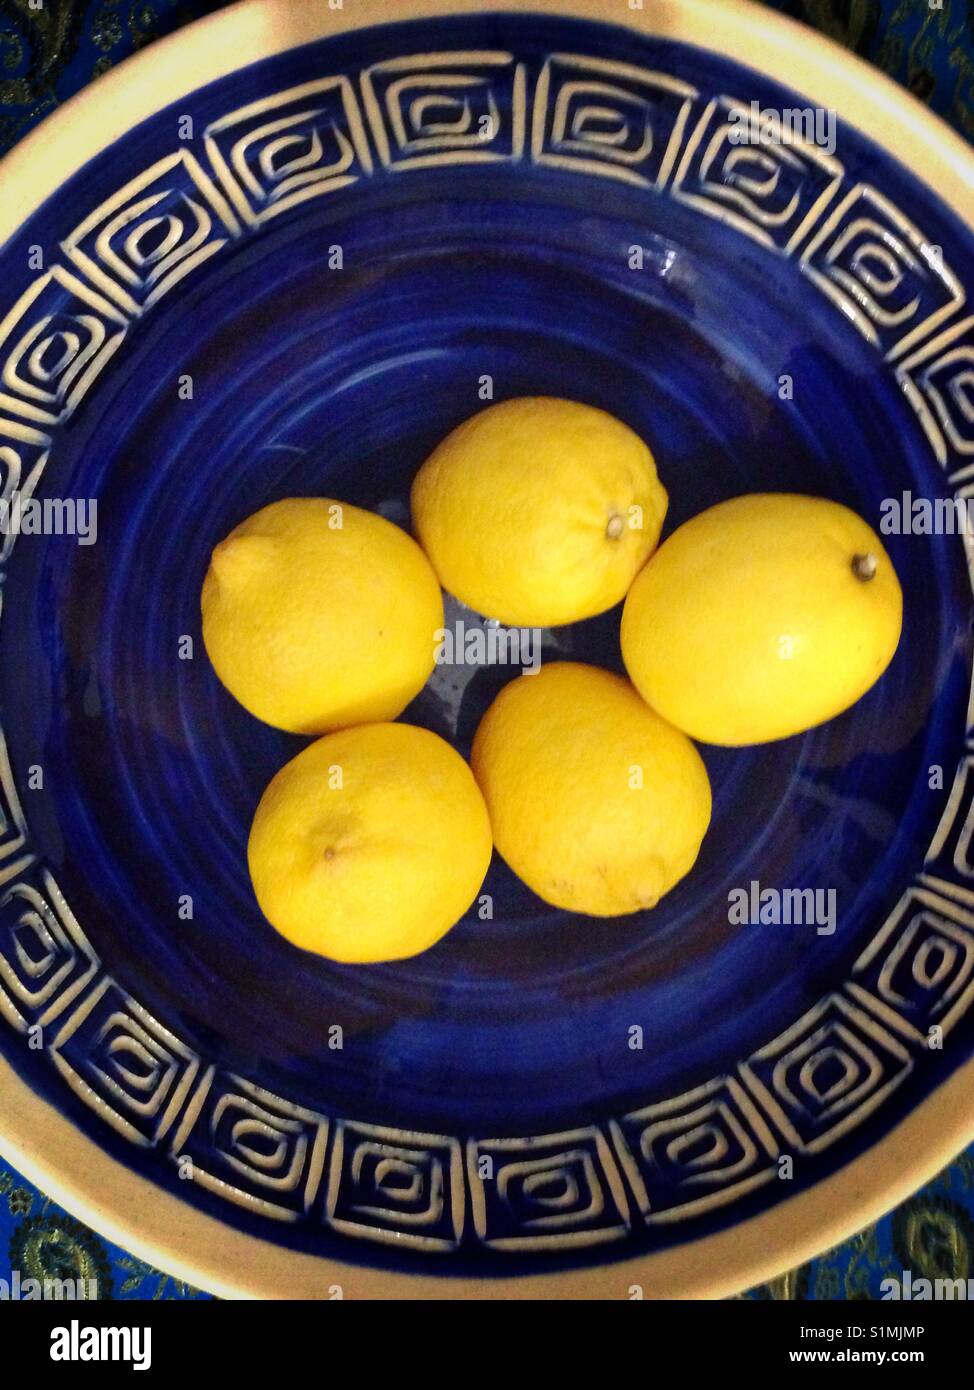 Yellow lemons in a blue bowl Stock Photo